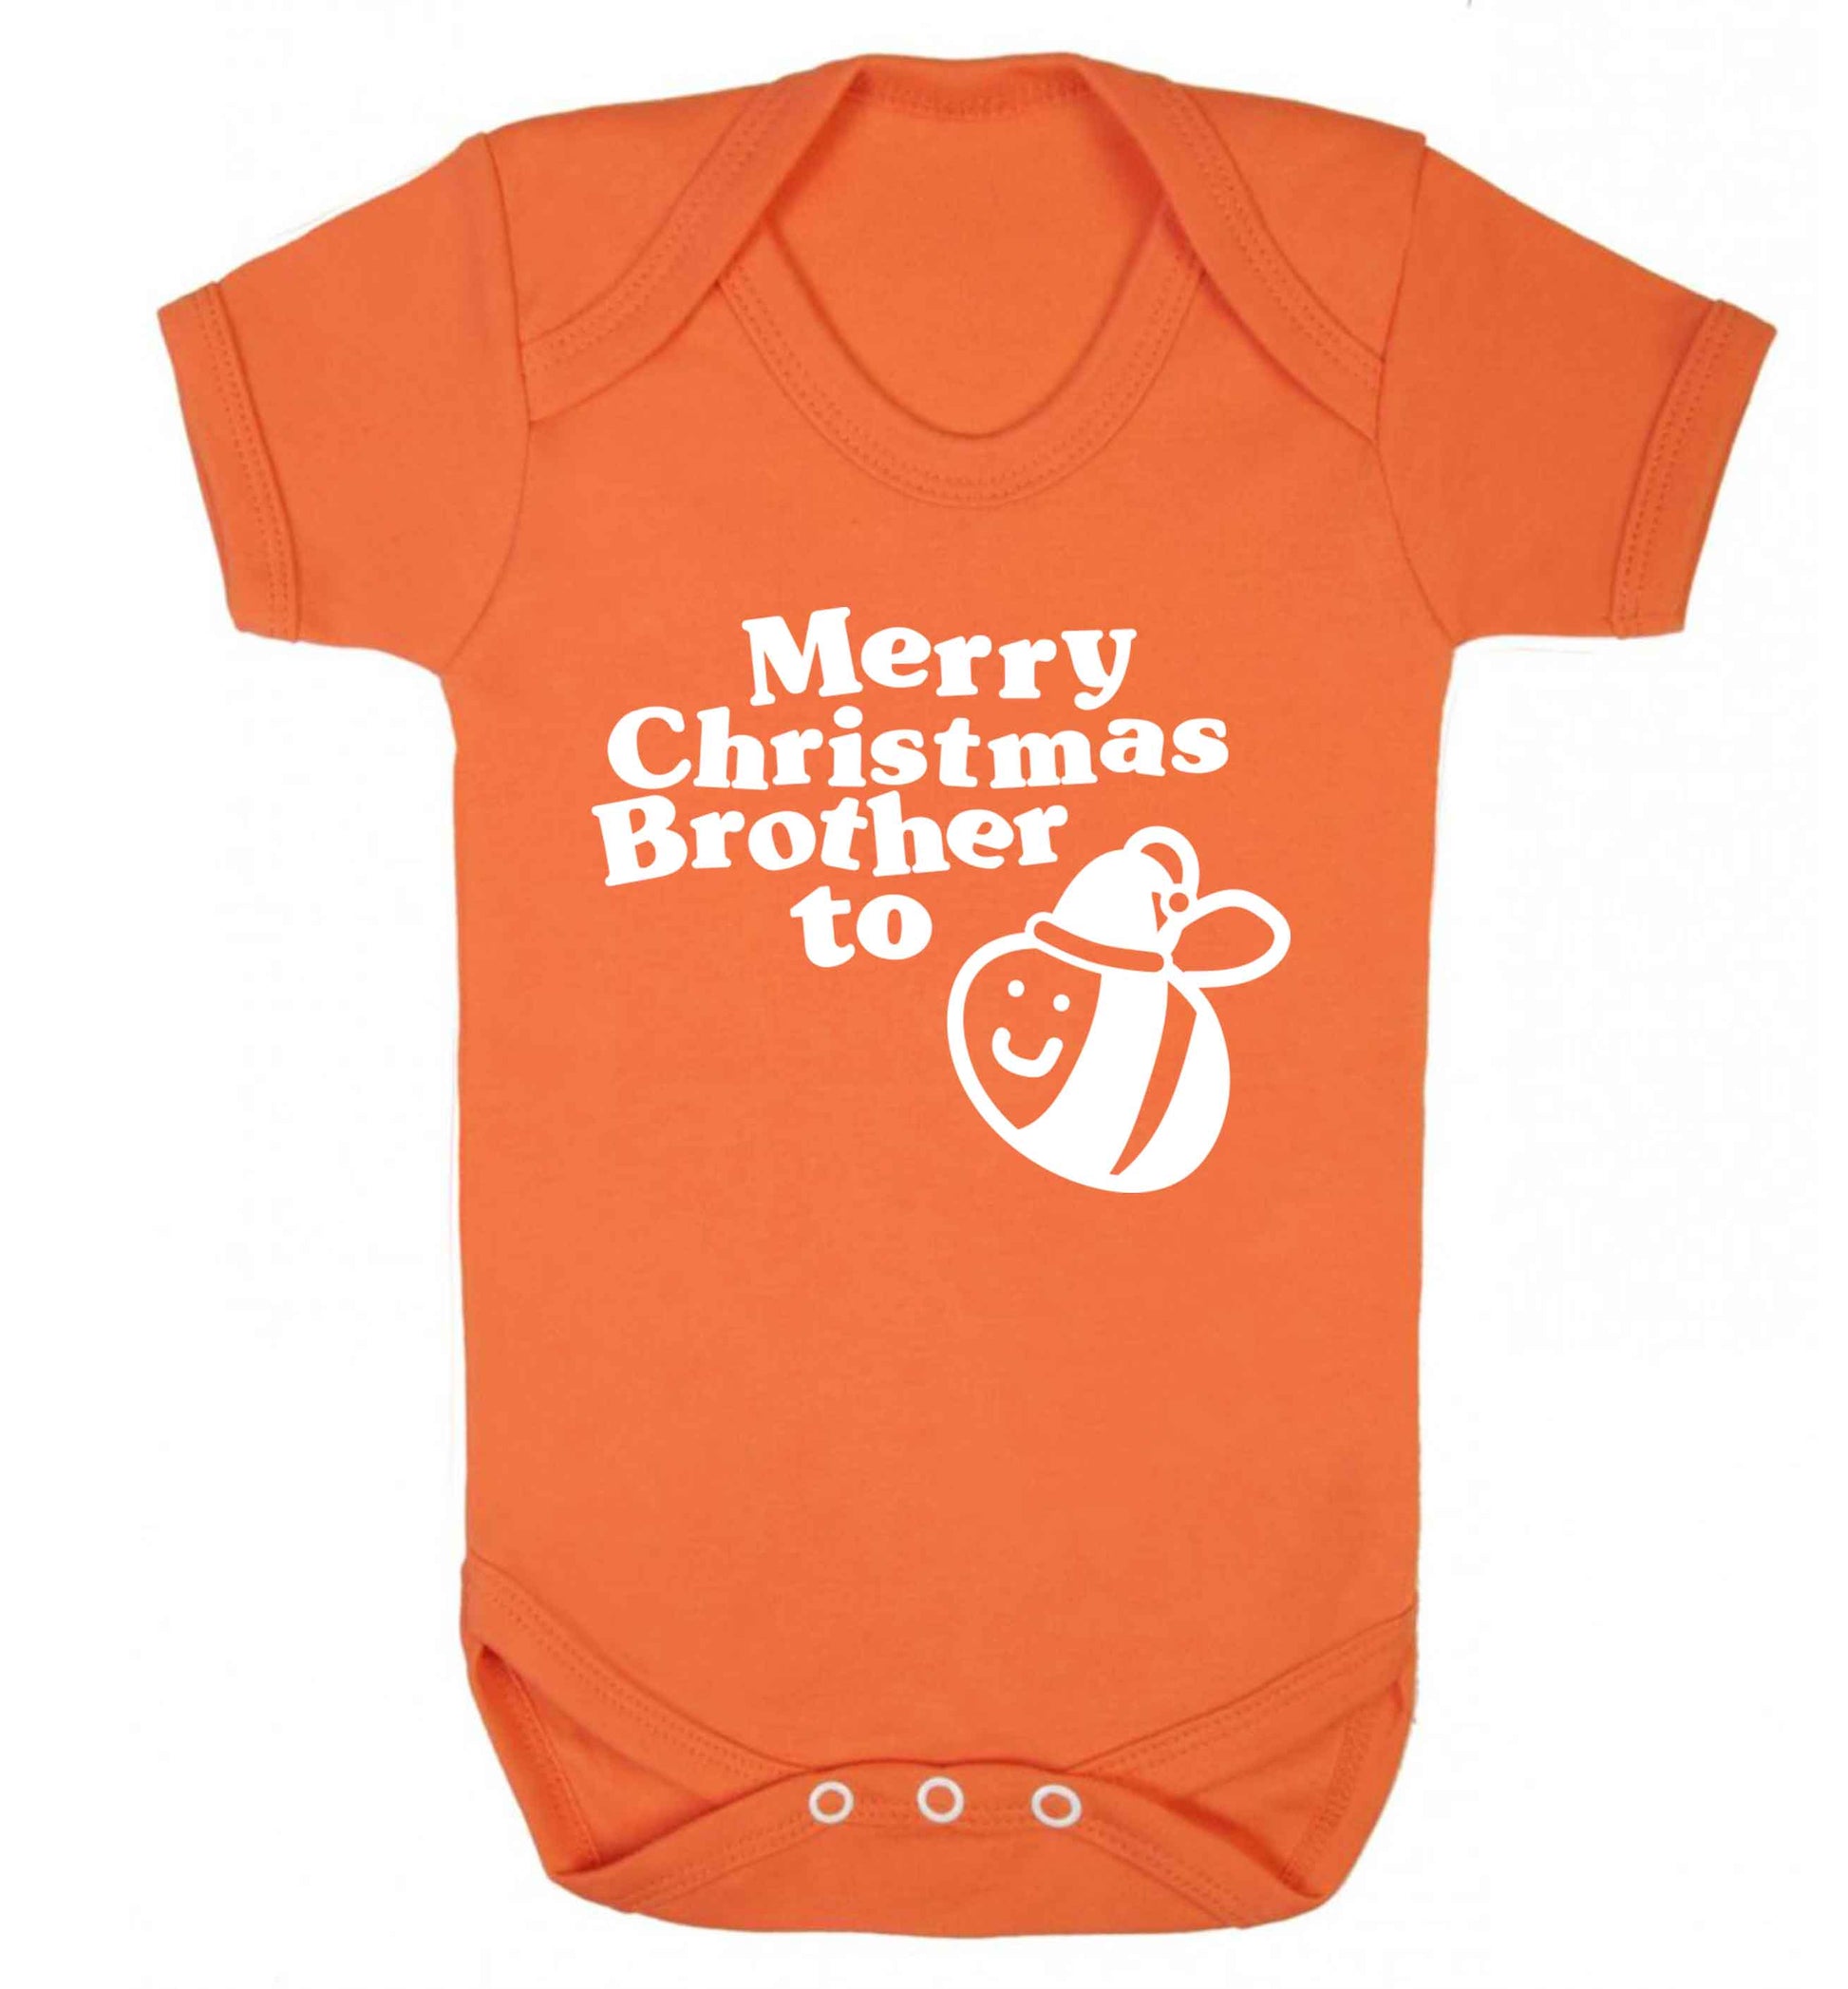 Merry Christmas brother to be Baby Vest orange 18-24 months